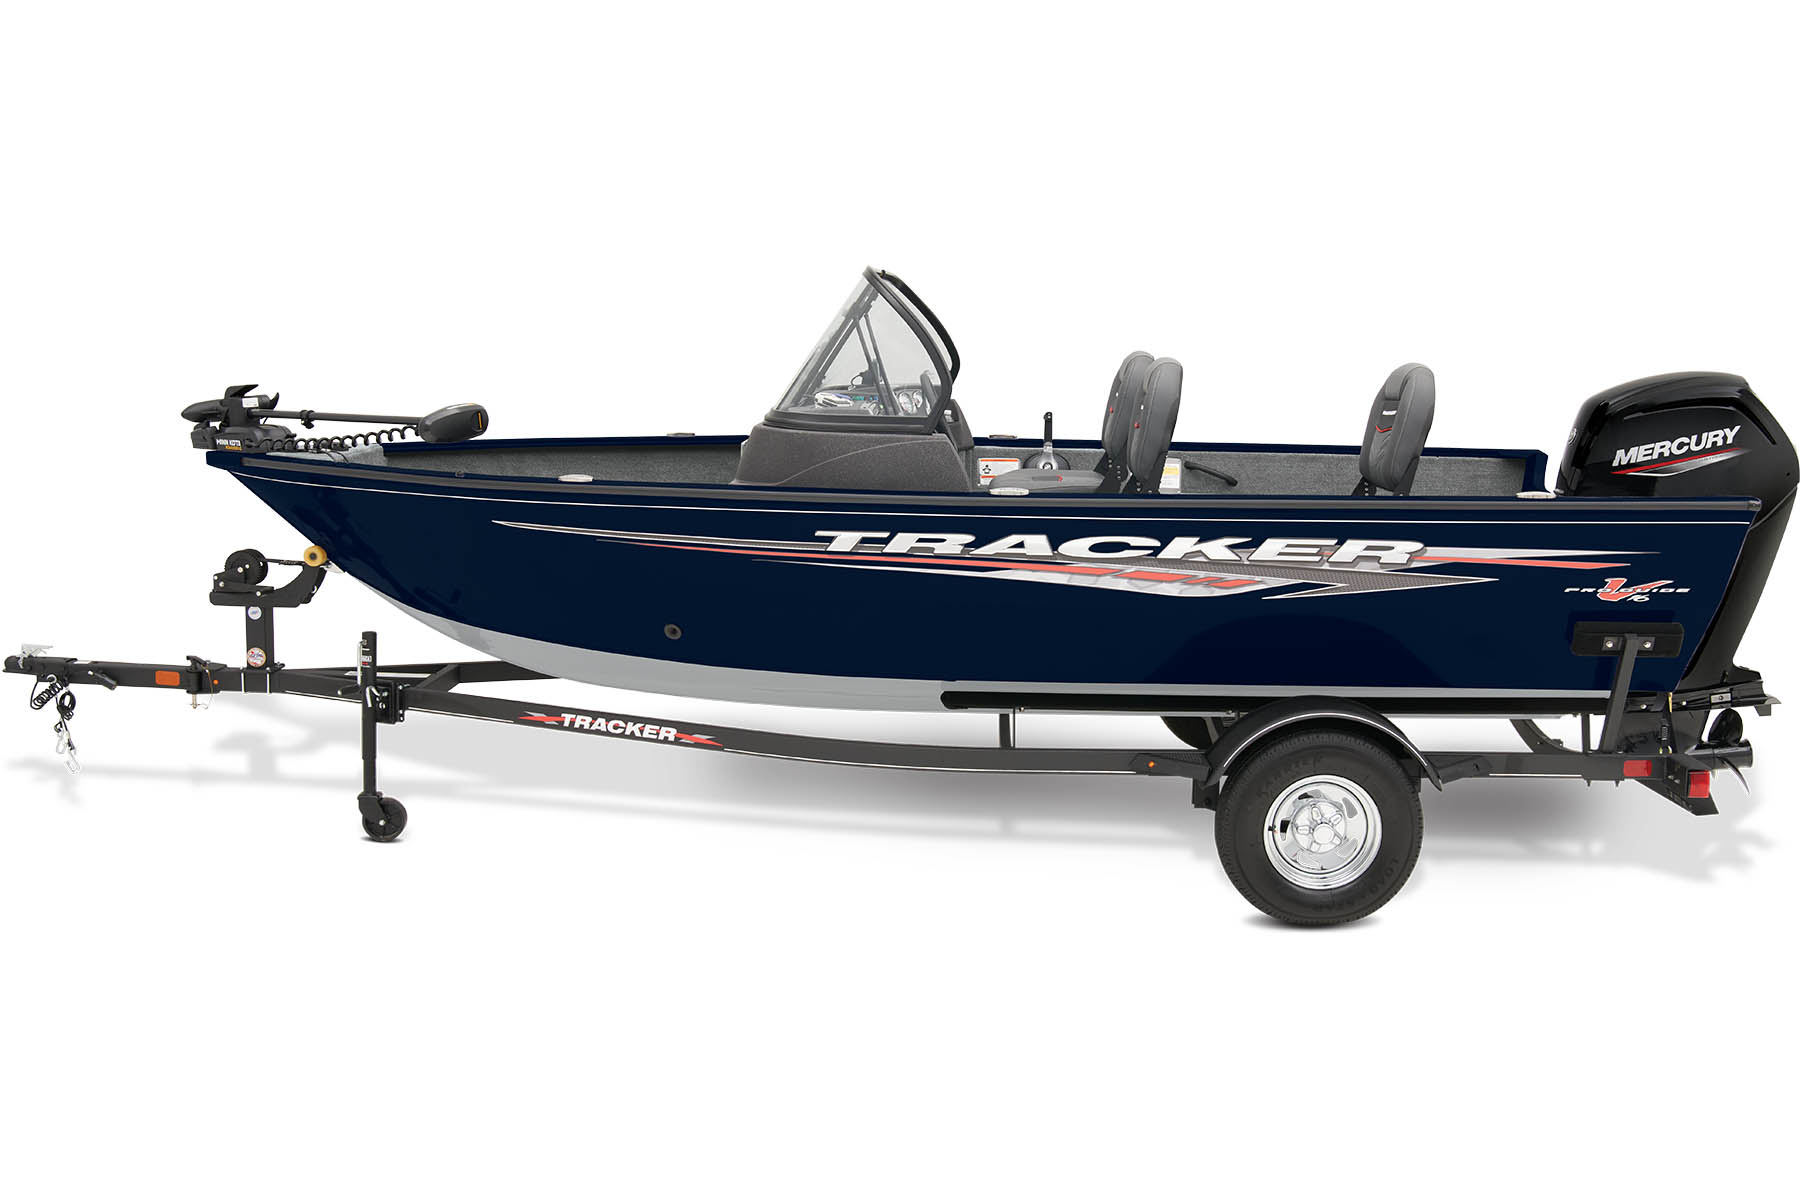 Tracker Pro 160: Four rods up to 7' (2.13 m) can be carried aboard with  ease.